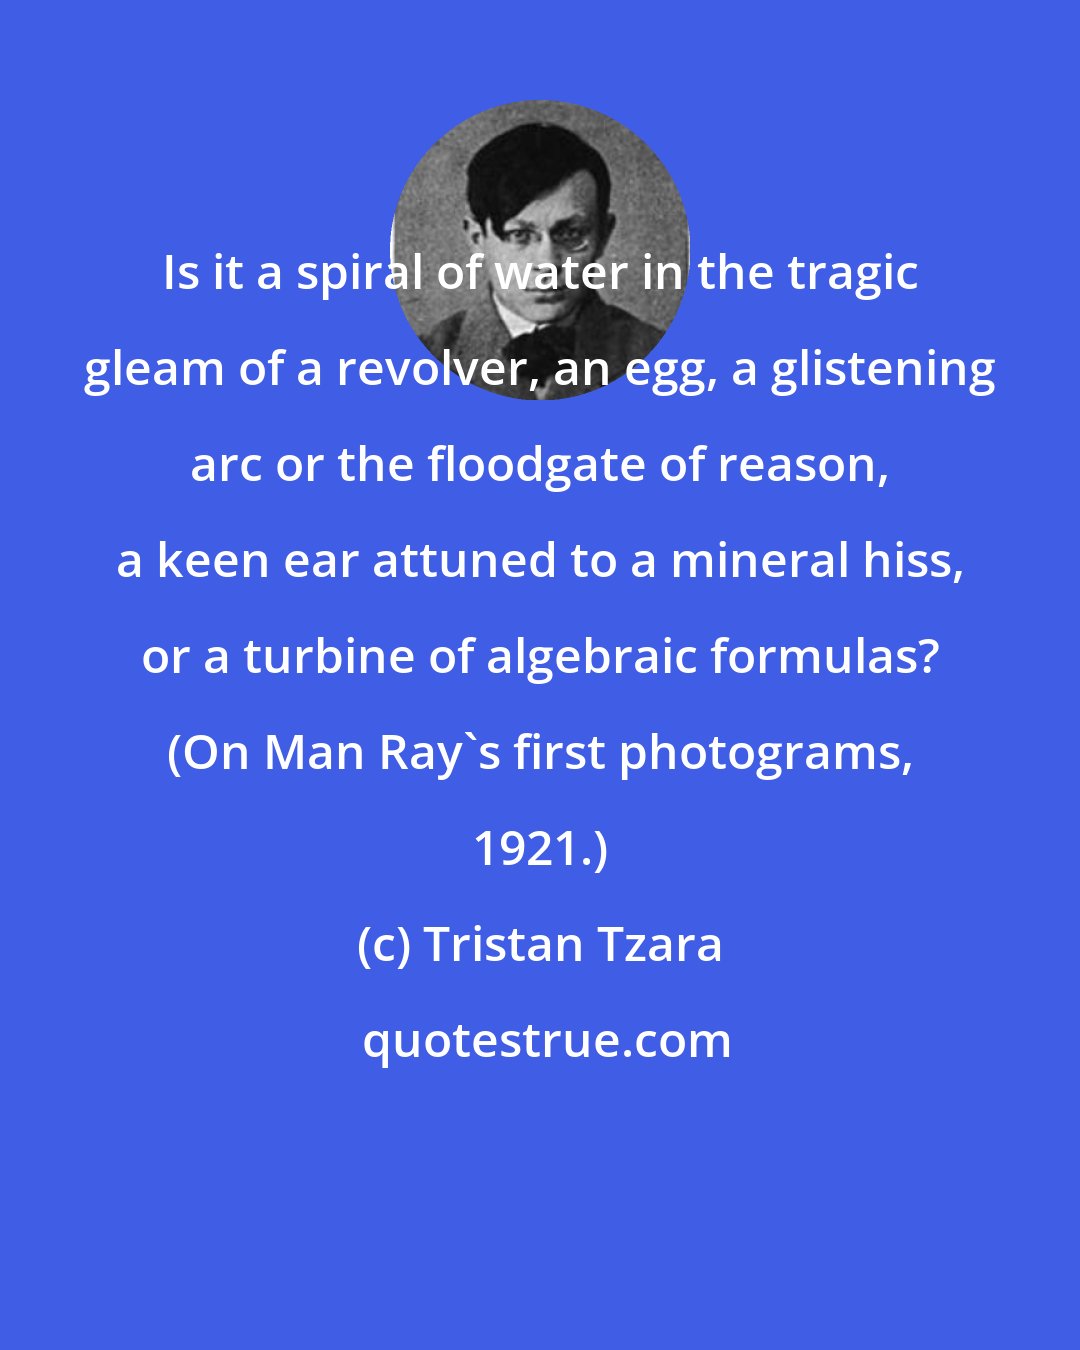 Tristan Tzara: Is it a spiral of water in the tragic gleam of a revolver, an egg, a glistening arc or the floodgate of reason, a keen ear attuned to a mineral hiss, or a turbine of algebraic formulas? (On Man Ray's first photograms, 1921.)